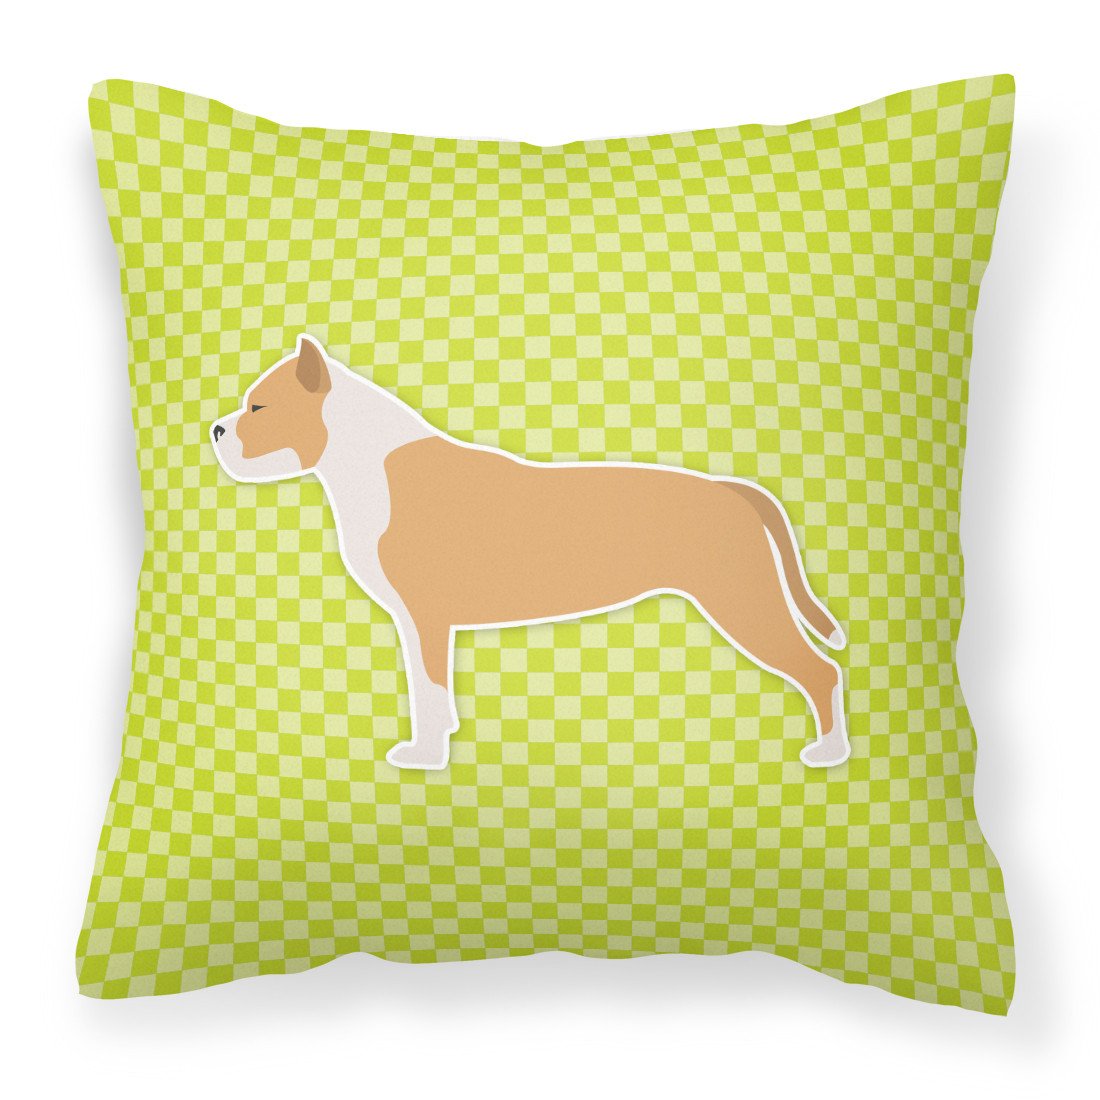 Staffordshire Bull Terrier Checkerboard Green Fabric Decorative Pillow BB3854PW1818 by Caroline's Treasures